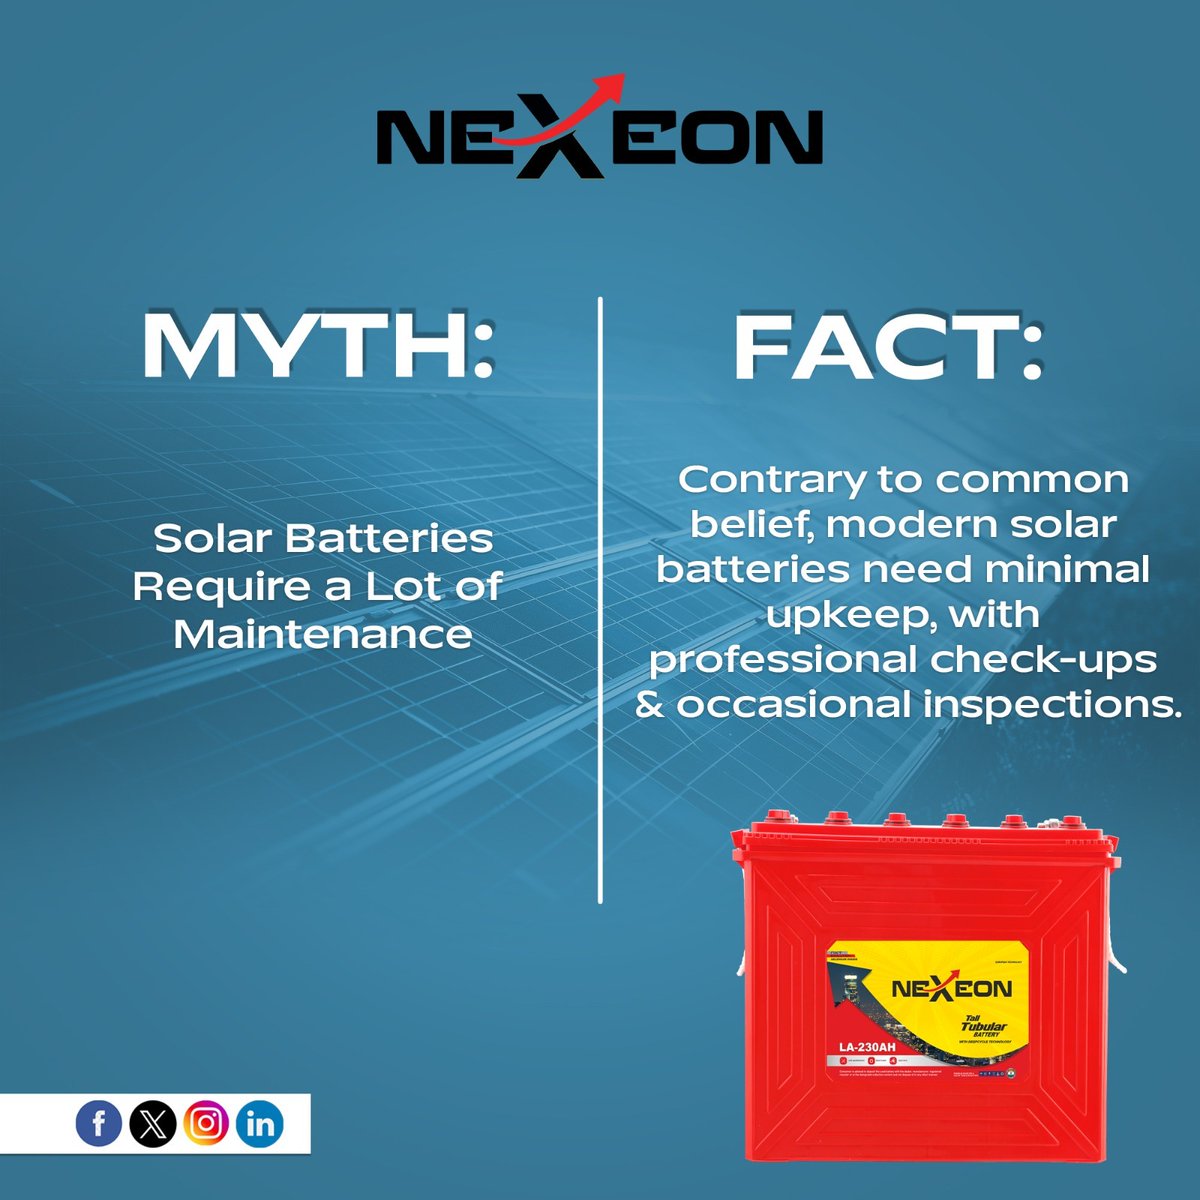 Solar batteries are efficient and low-maintenance, unlike the myth that they require constant upkeep. Enjoy reliable power storage with minimal effort.

#NexeonBattery #Battery #SolarBattery #TallTubularBattery #Myth #MythBusting #Fact #MythVsFact #BatteryManufacturer #Nigeria